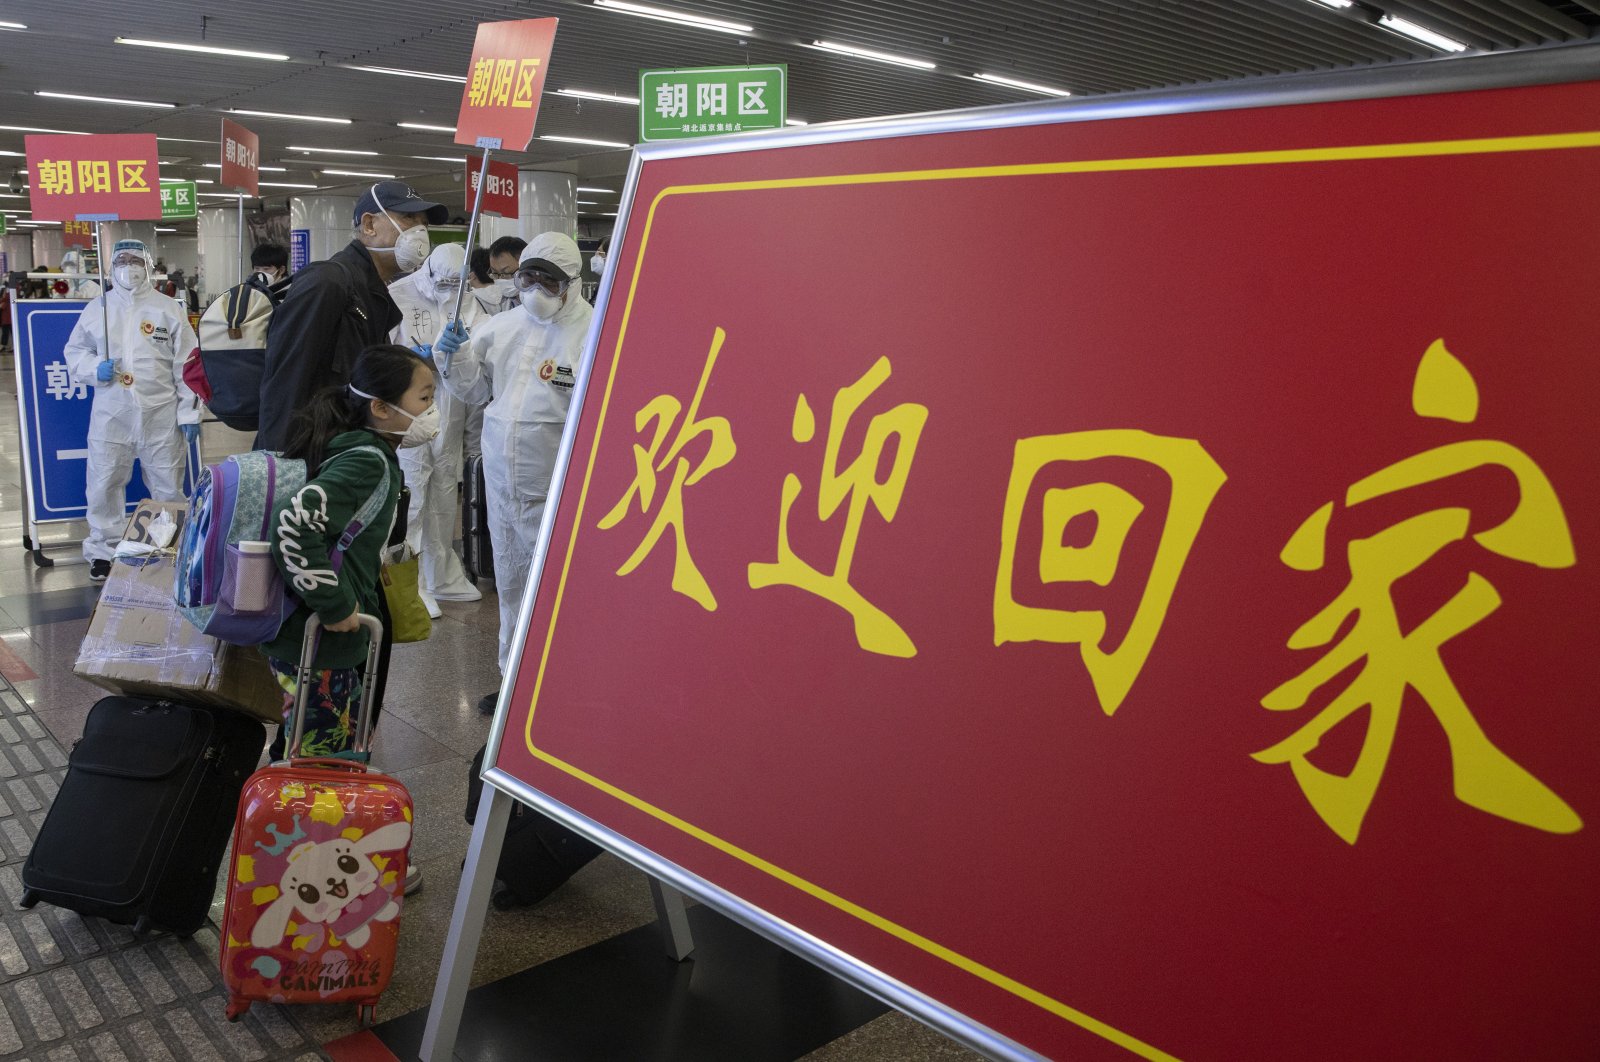 Passengers from Wuhan walk past a sign which reads "Welcome Home" after arriving on a high-speed train in Beijing, China, April 19, 2020. (AP Photo)